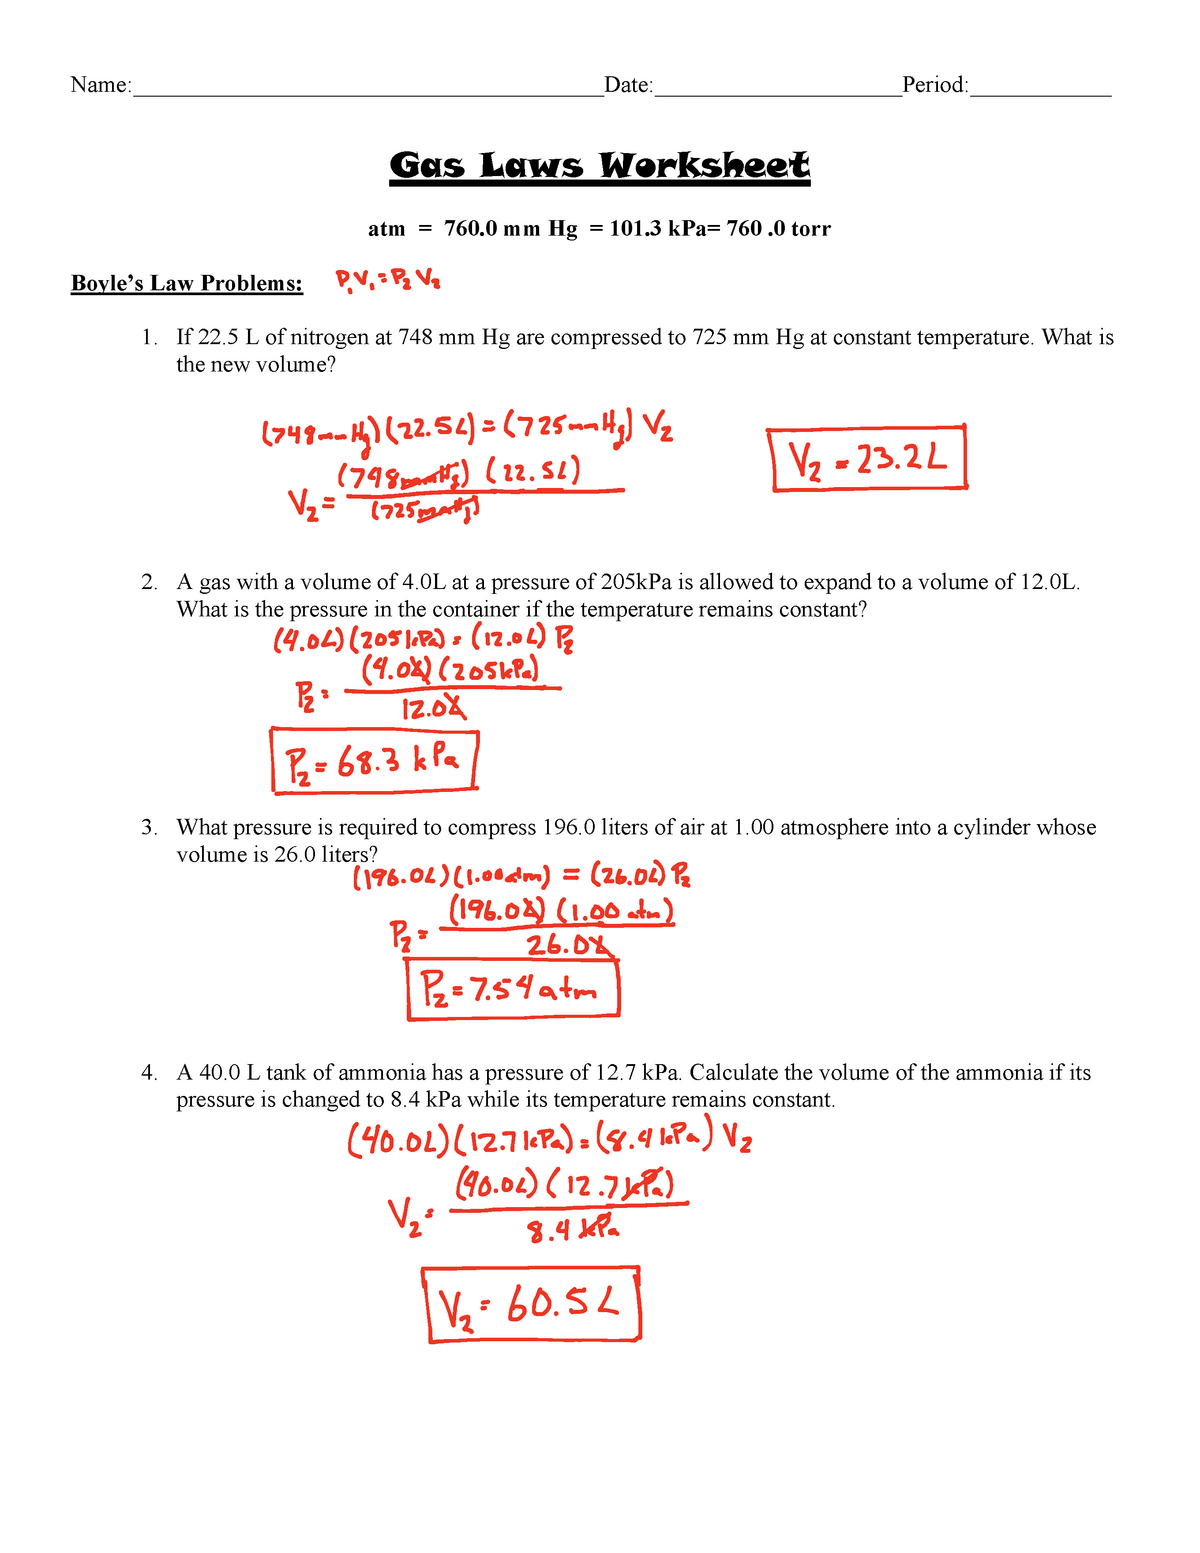 Gas Laws Worksheet answer key - BS Psychology - PSY21 - University Throughout Ideal Gas Laws Worksheet